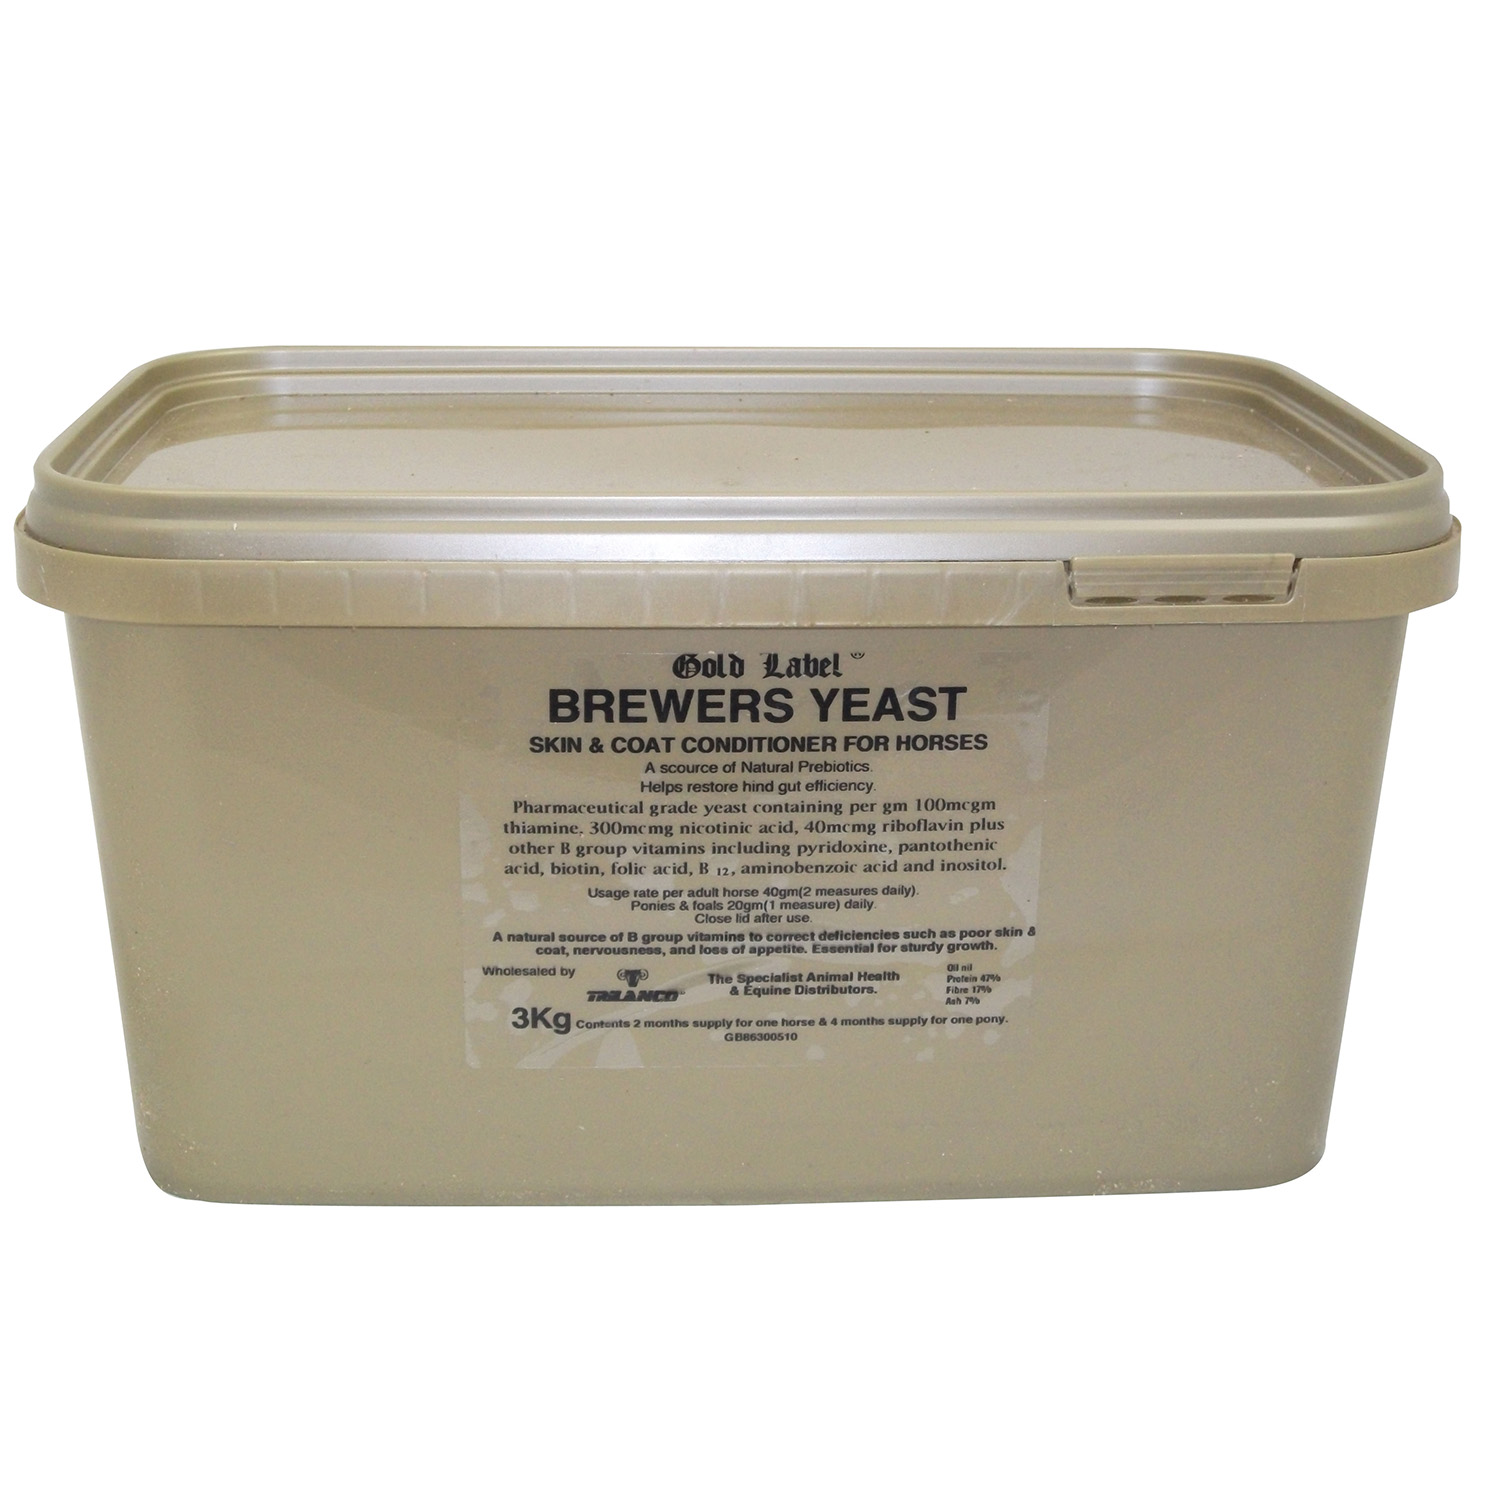 GOLD LABEL BREWERS YEAST 3 KG 3 KG